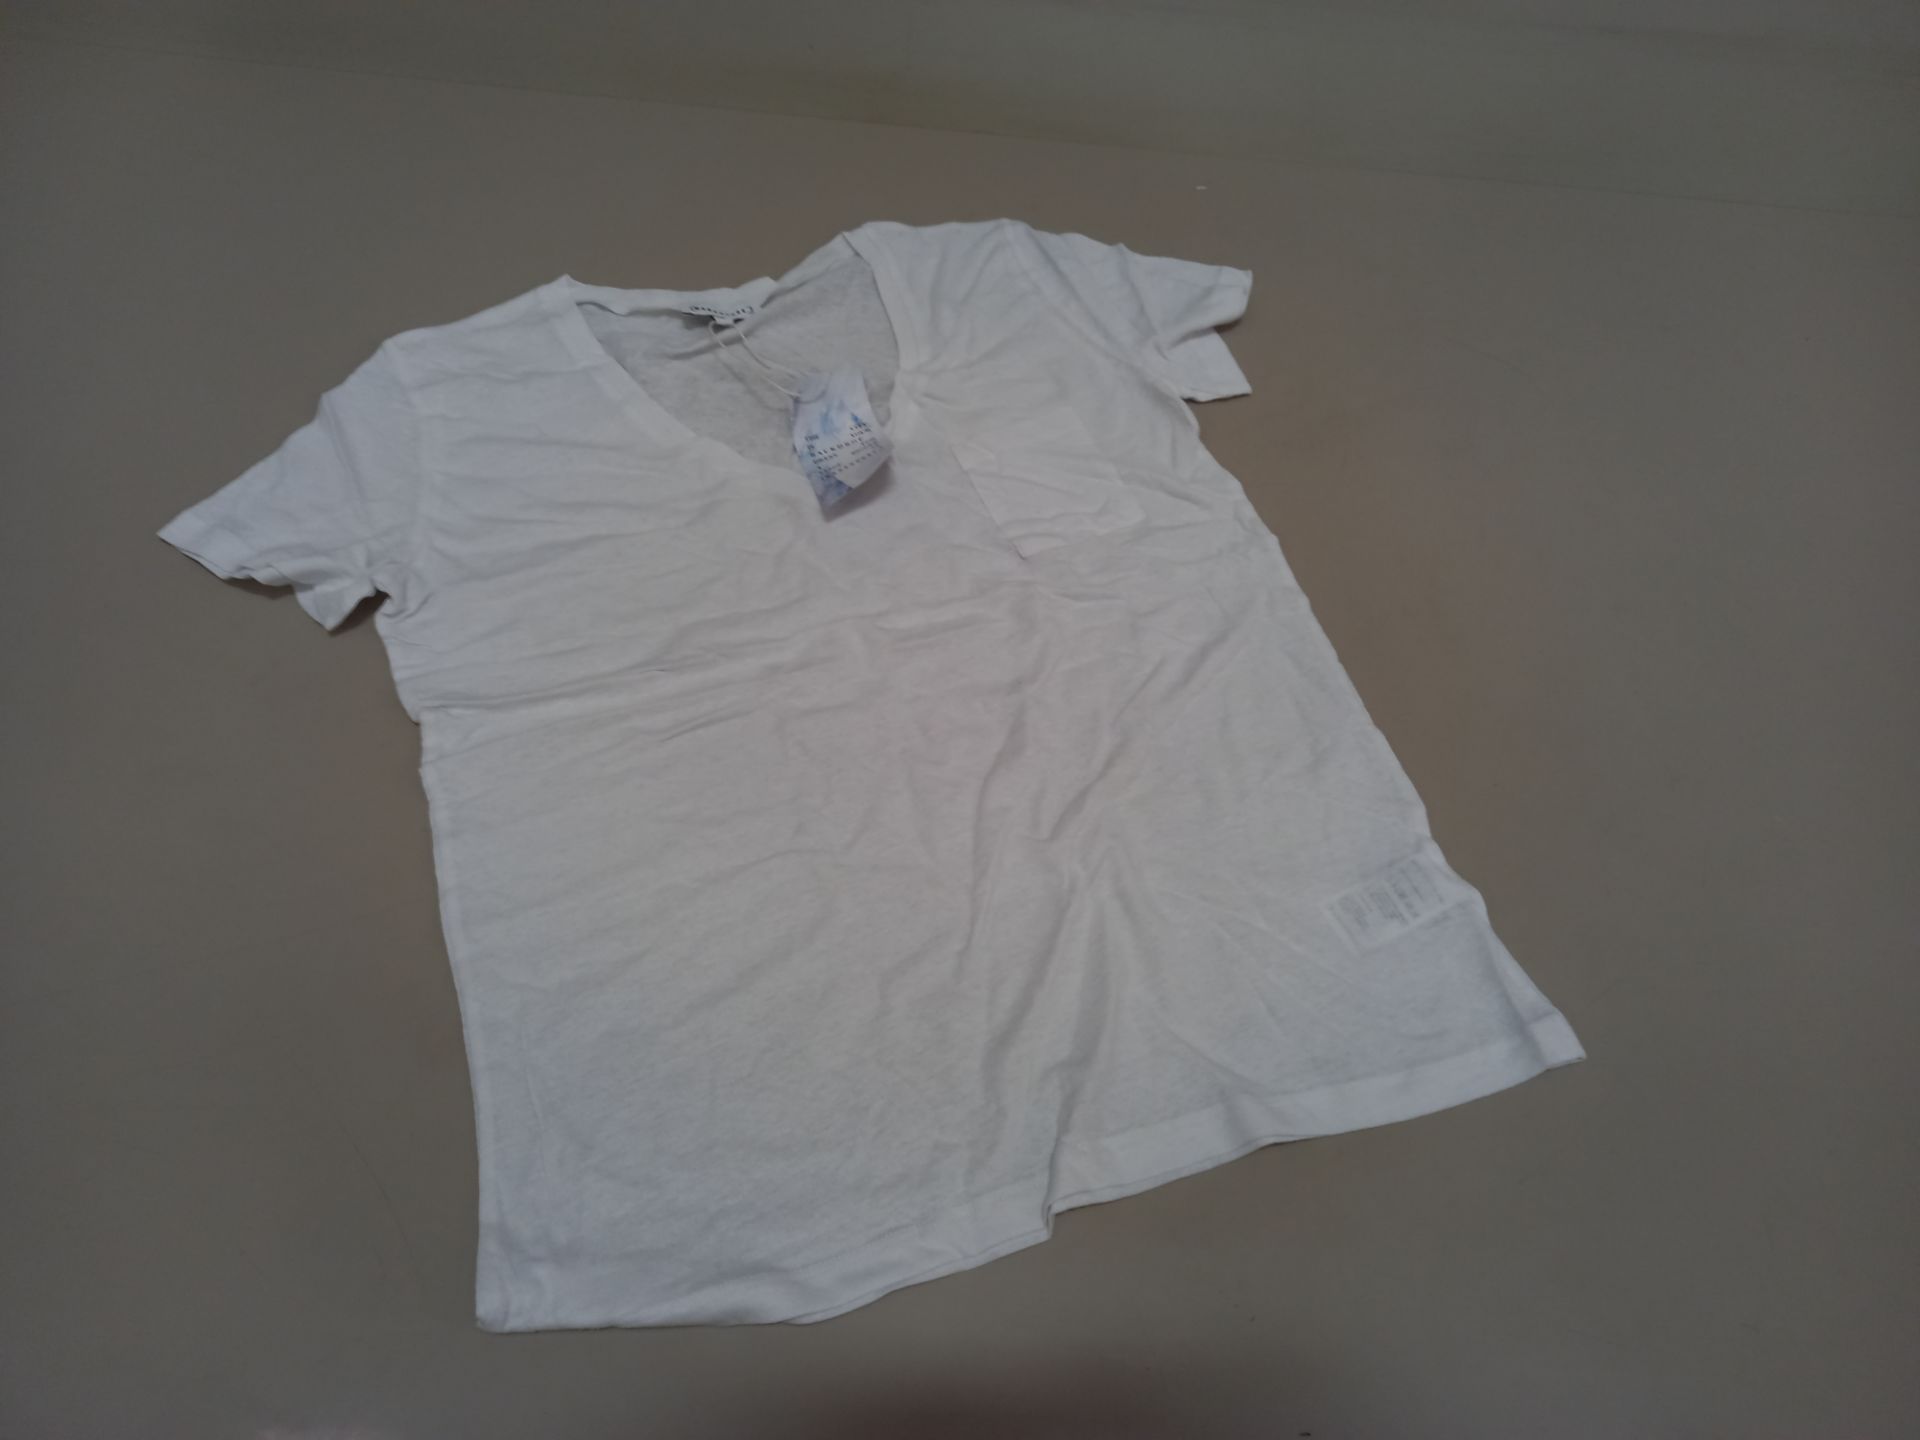 30 X BRAND NEW WAREHOUSE CLOTHING WHITE LINEN V NECK T SHIRTS IN VARIOUS SIZES RRP Â£16.00